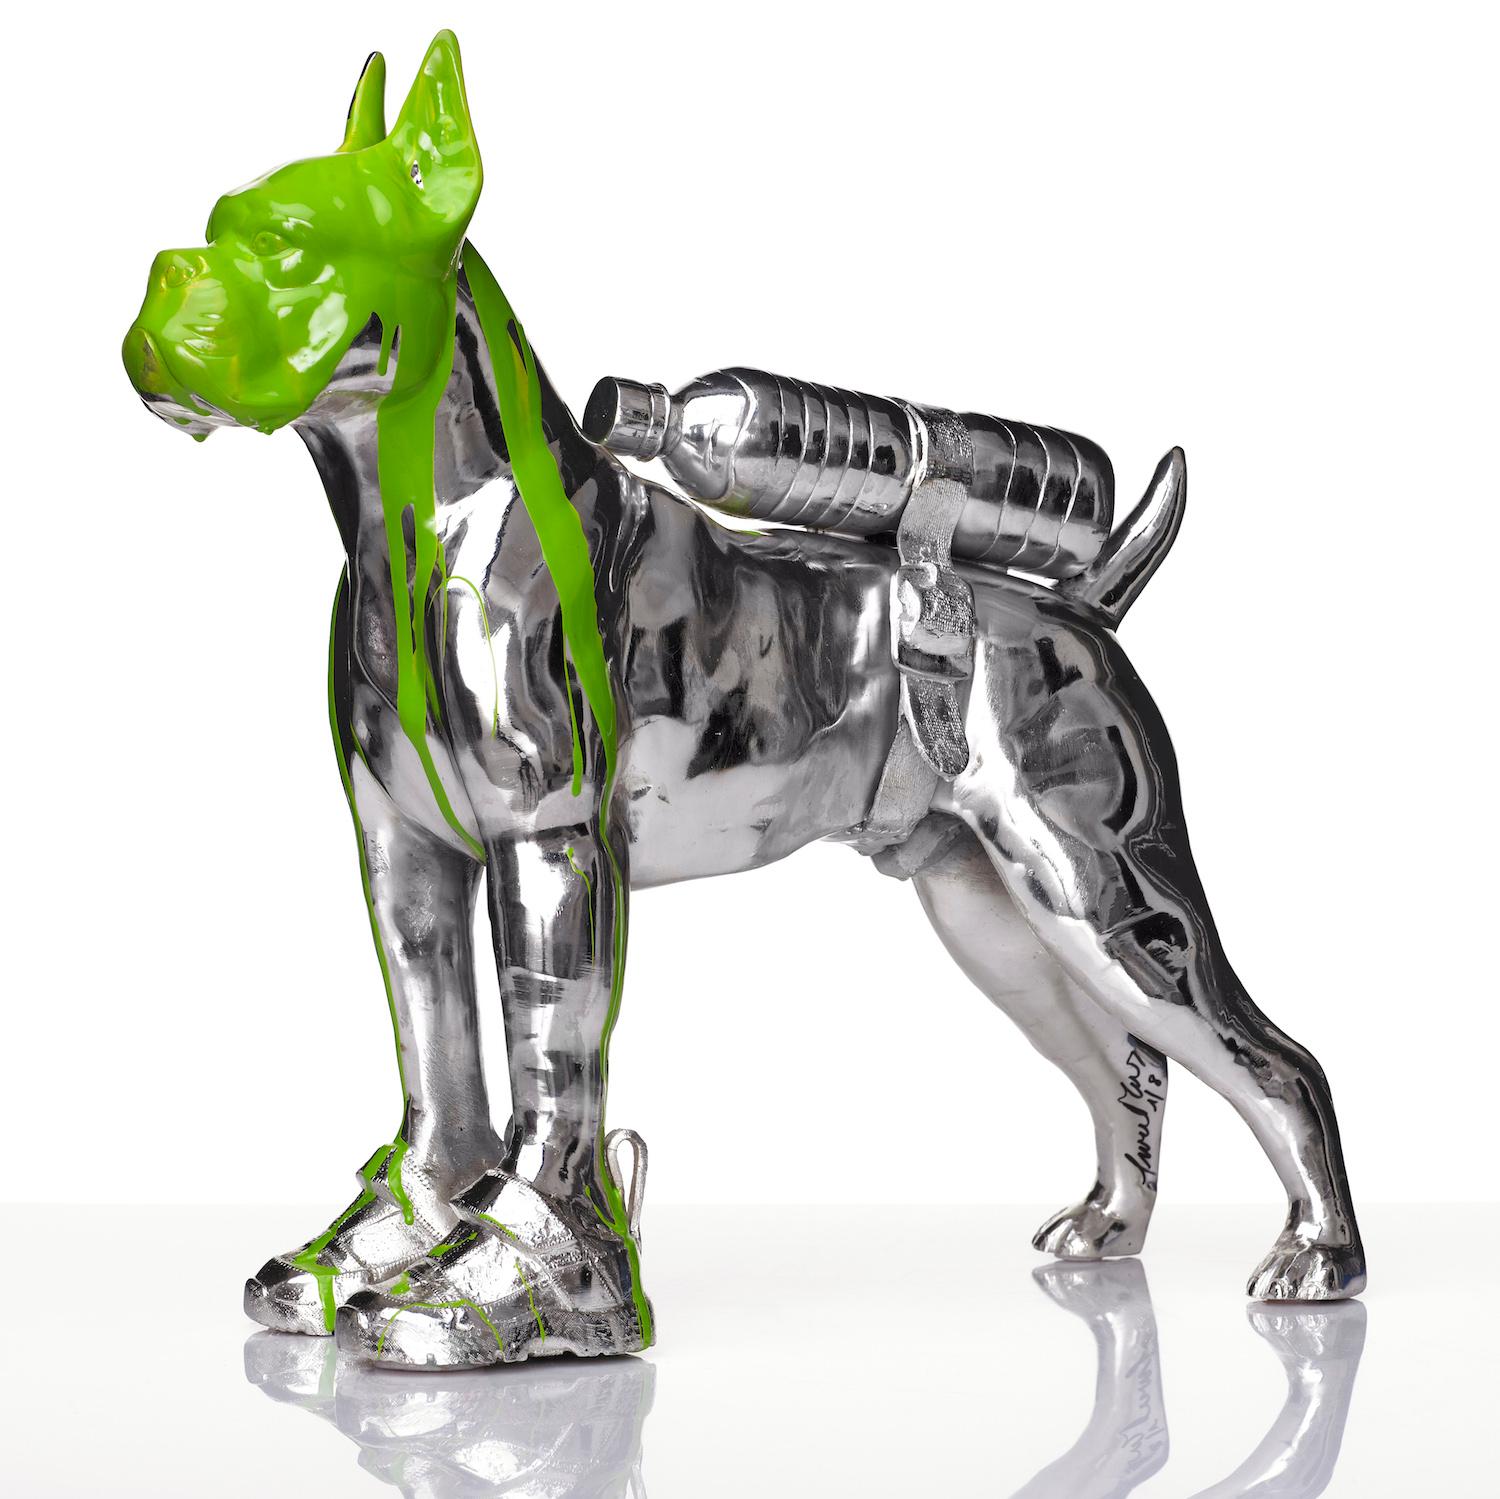 William Sweetlove. Cloned Bulldog with pet bottle. 
Original sculpture 4/8 ex.
2011 - 2020.
Silver plated bronze.
Acquired directly from the artist.
Free shipment worldwide.

William Sweetlove, born in Ostend, Belgium, in 1949, unites dadaism with